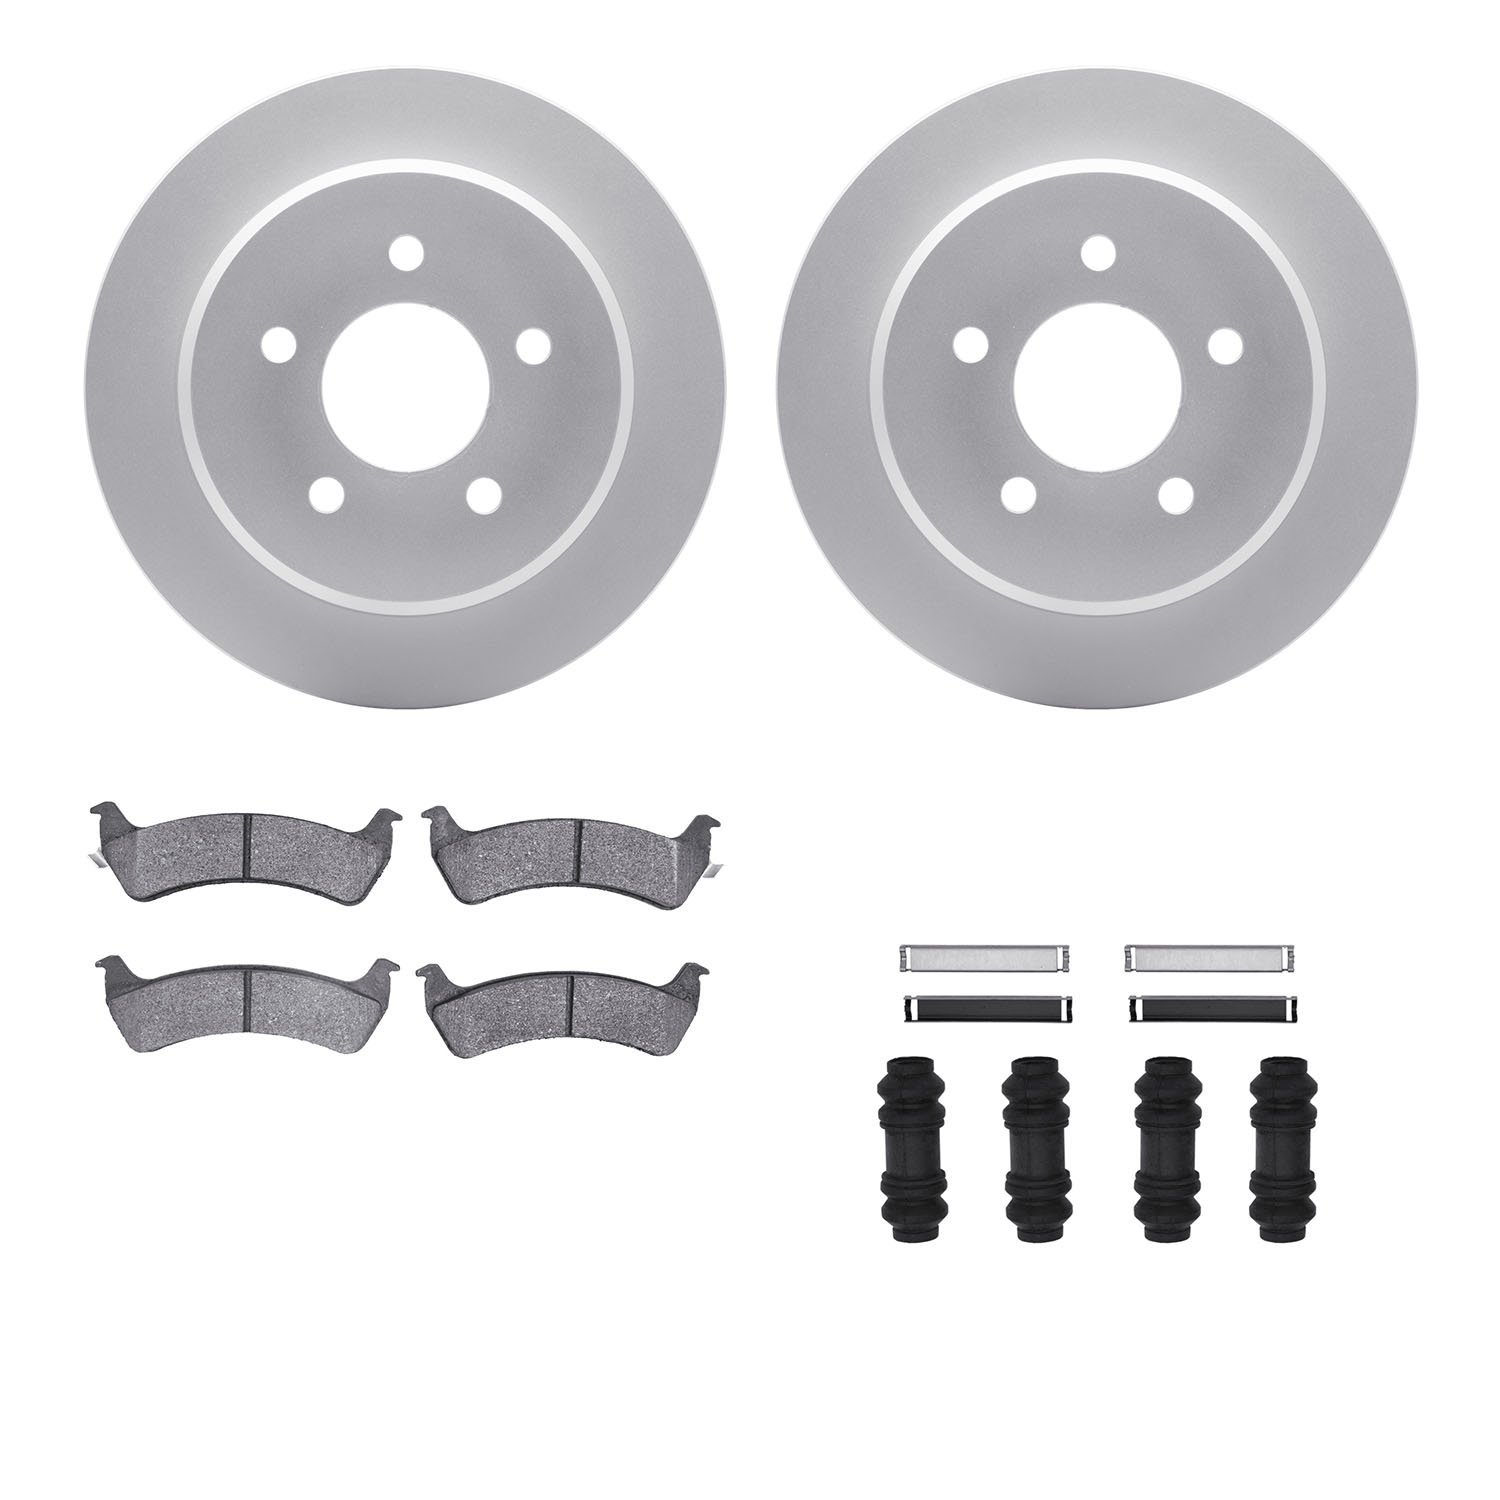 4412-54014 Geospec Brake Rotors with Ultimate-Duty Brake Pads & Hardware, 2001-2002 Ford/Lincoln/Mercury/Mazda, Position: Rear